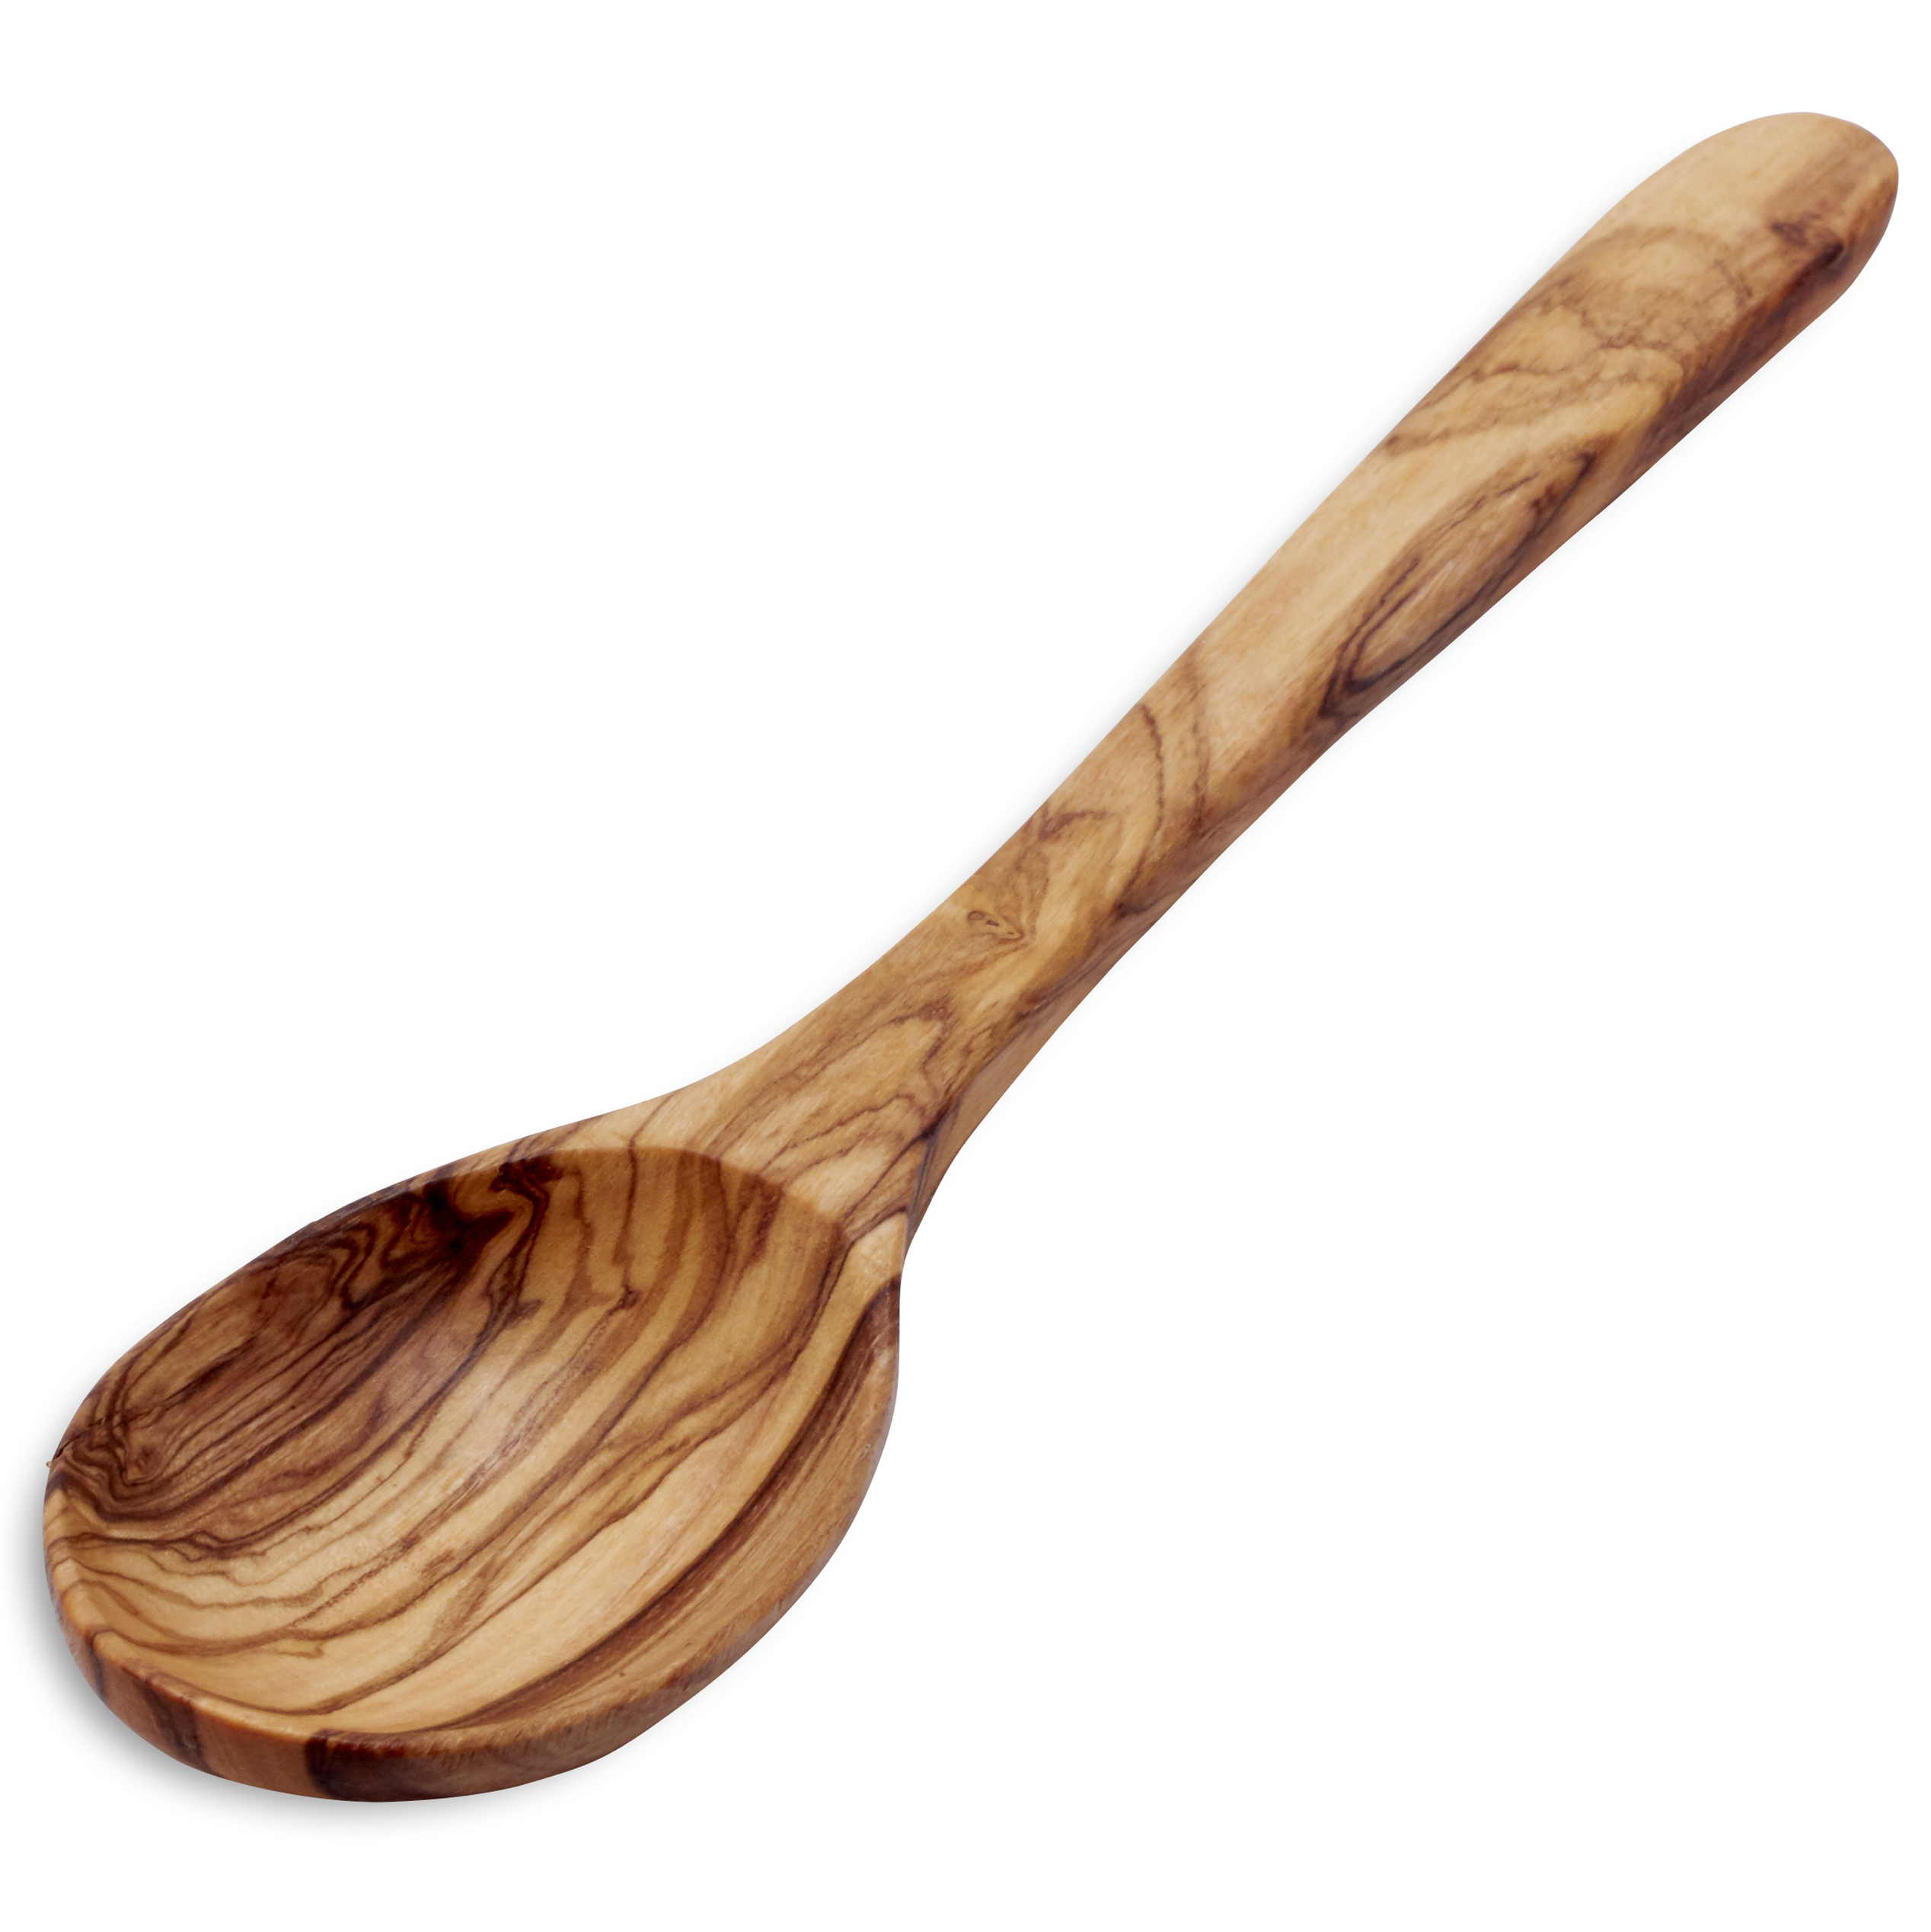 Olive Wood Big Spoon 9 Inch Mom Gift Wooden large spoon Kitchen gift